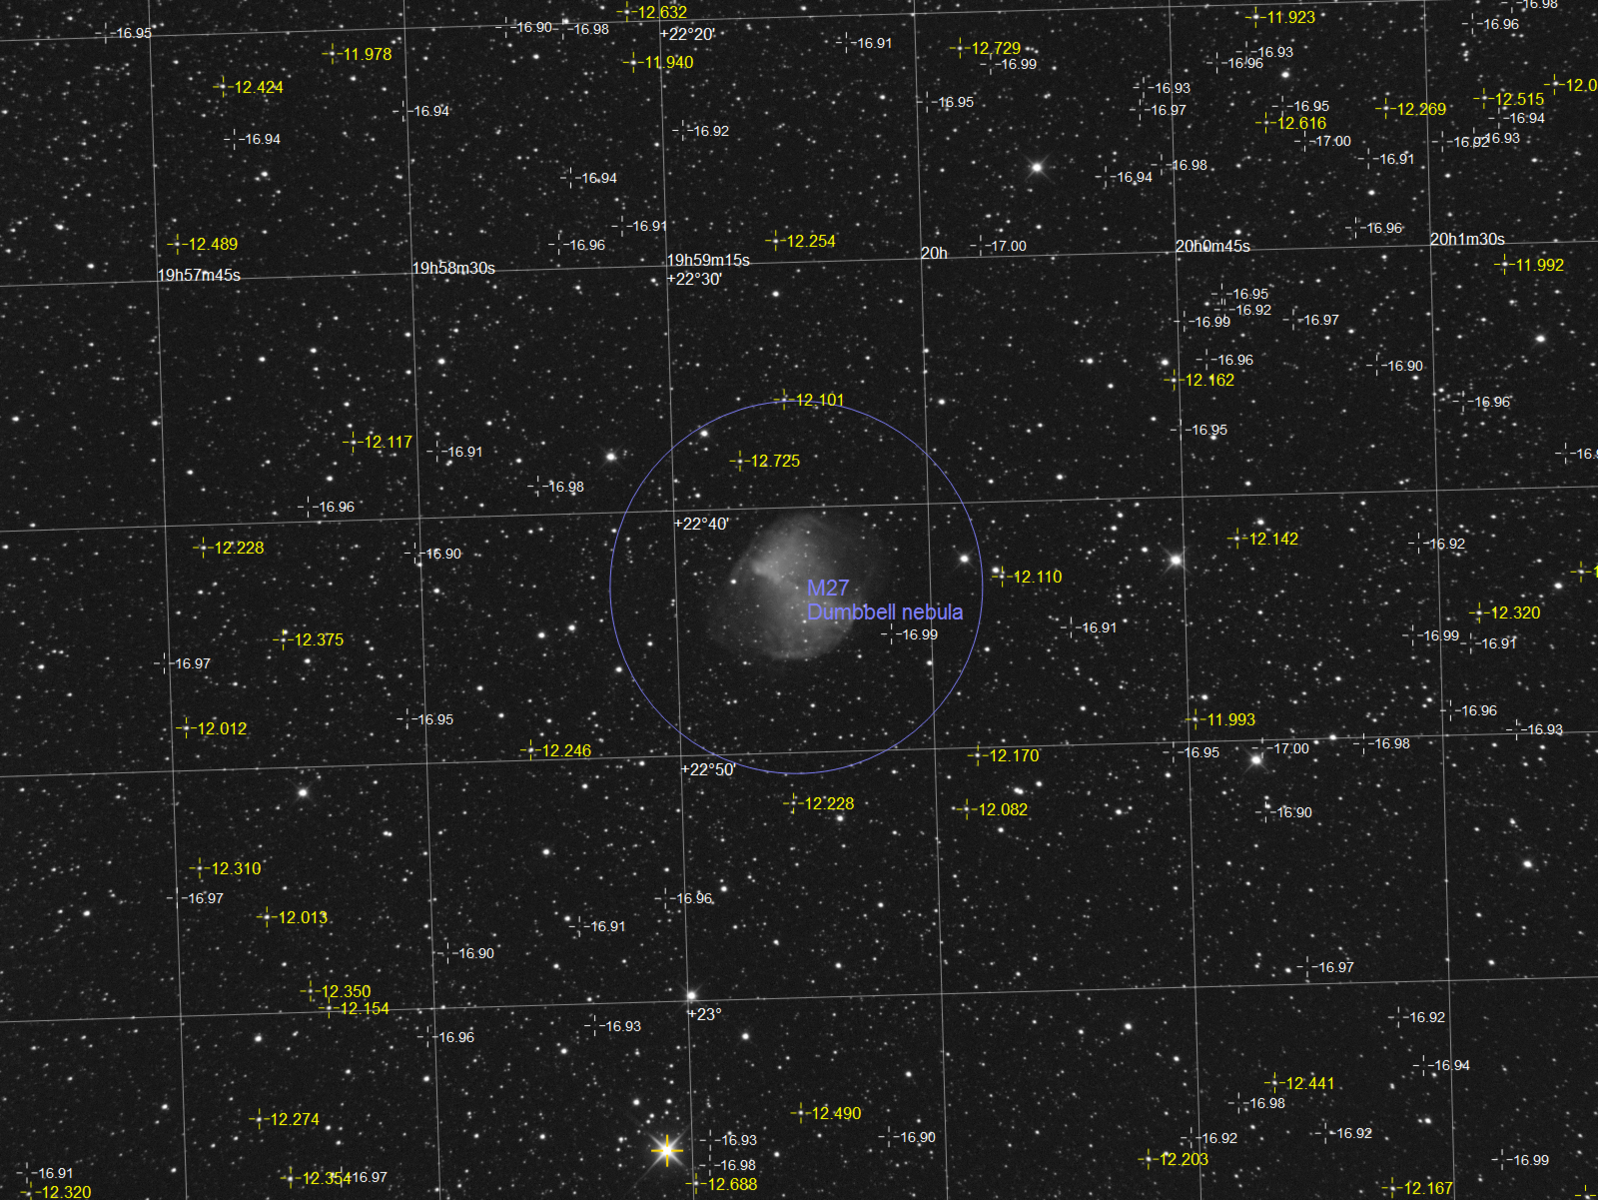 Messier_27_CCD_Image_279_ABE_Res_Annotated.thumb.png.1b37d3e7924366aad3d155587863721c.png